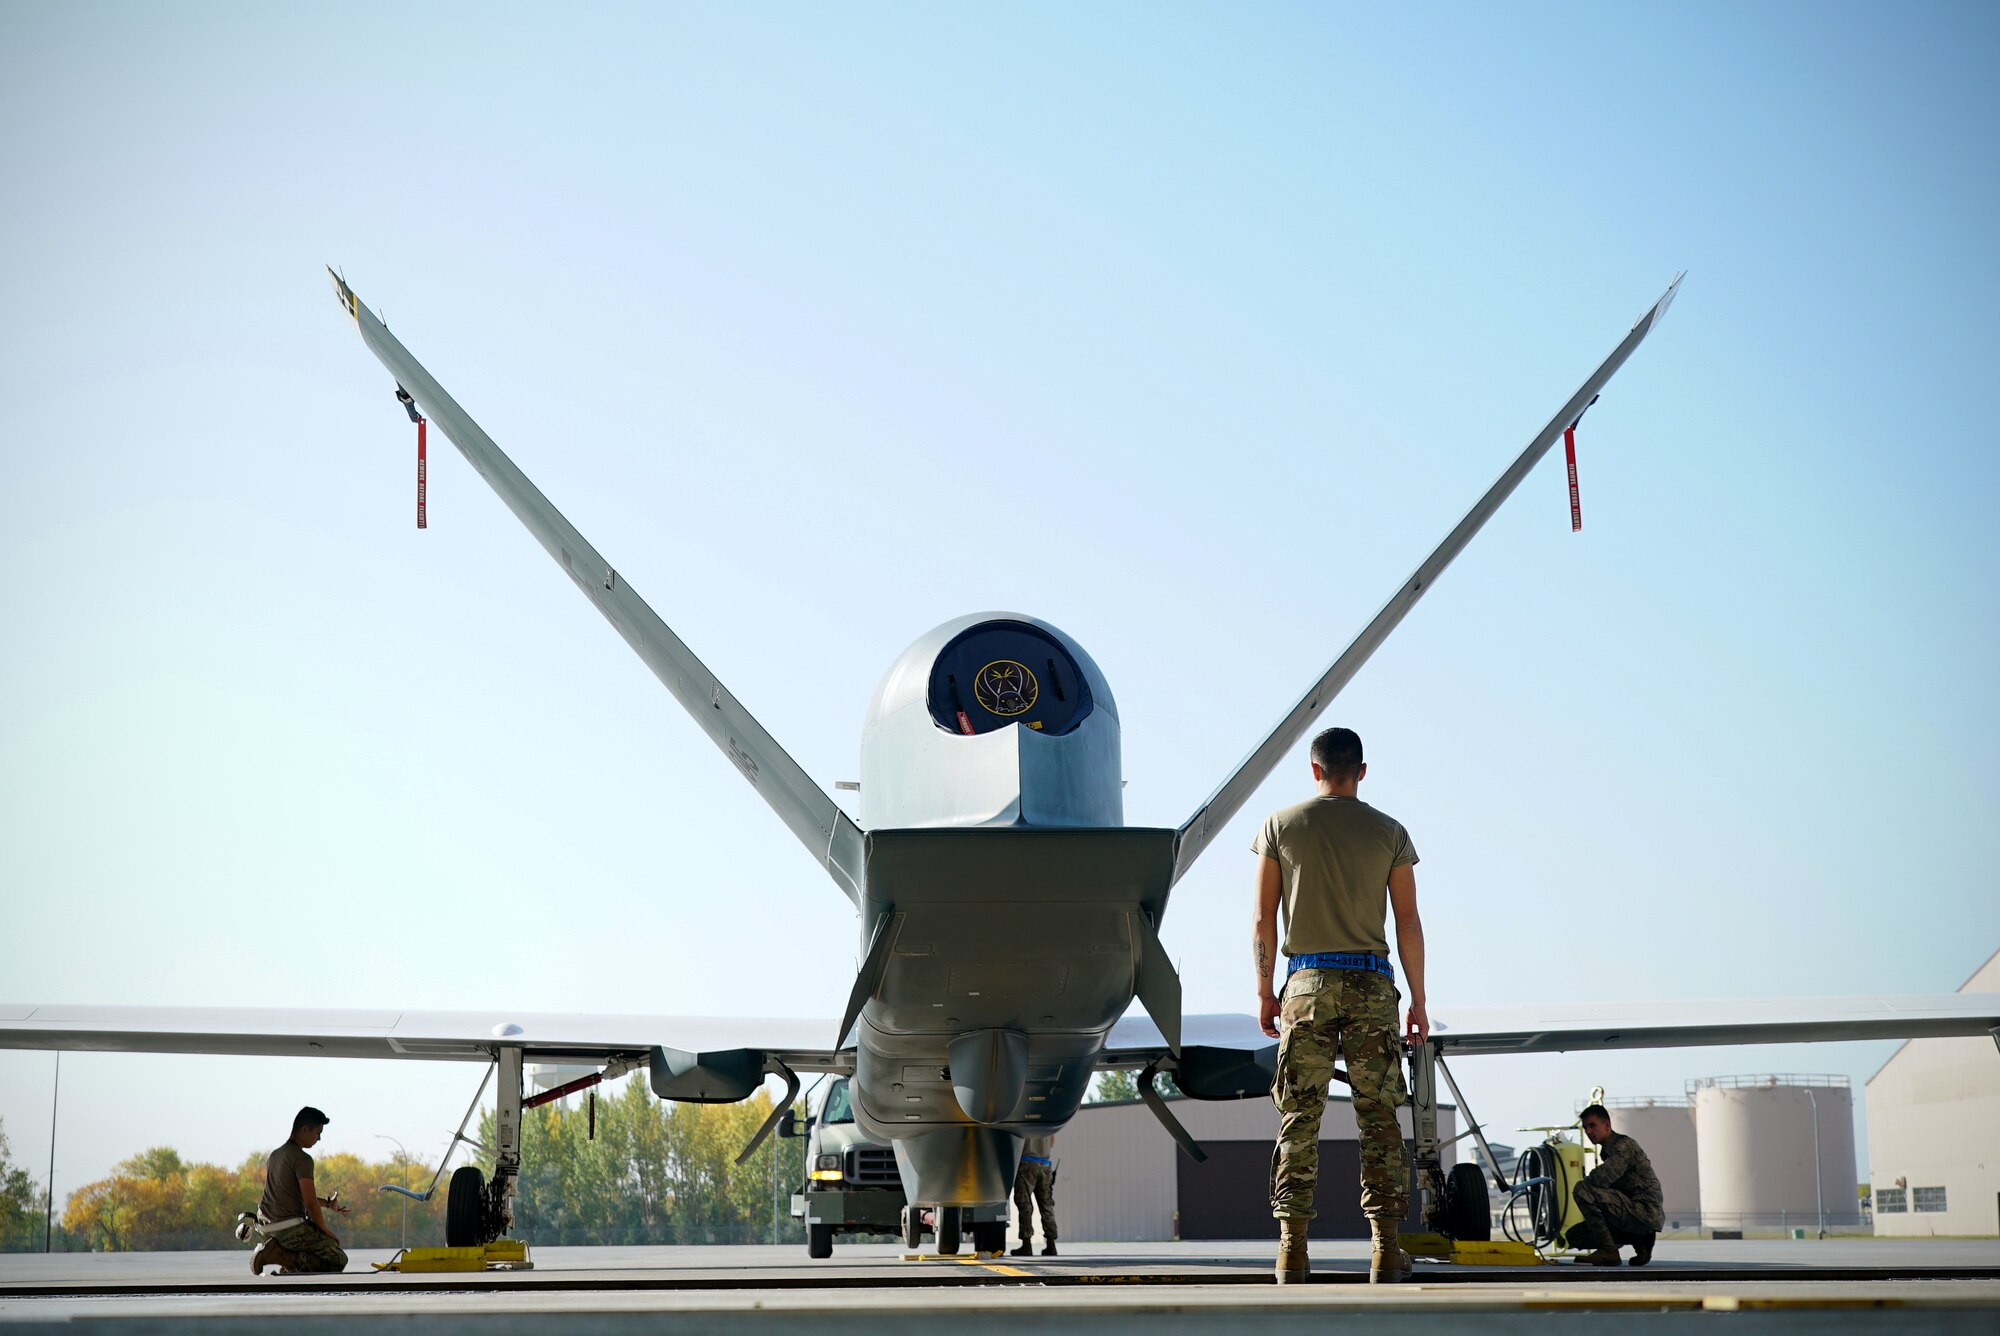 A uniformed military member stands with his back to the camera as he looks on to the back of a small unmanned aircraft.